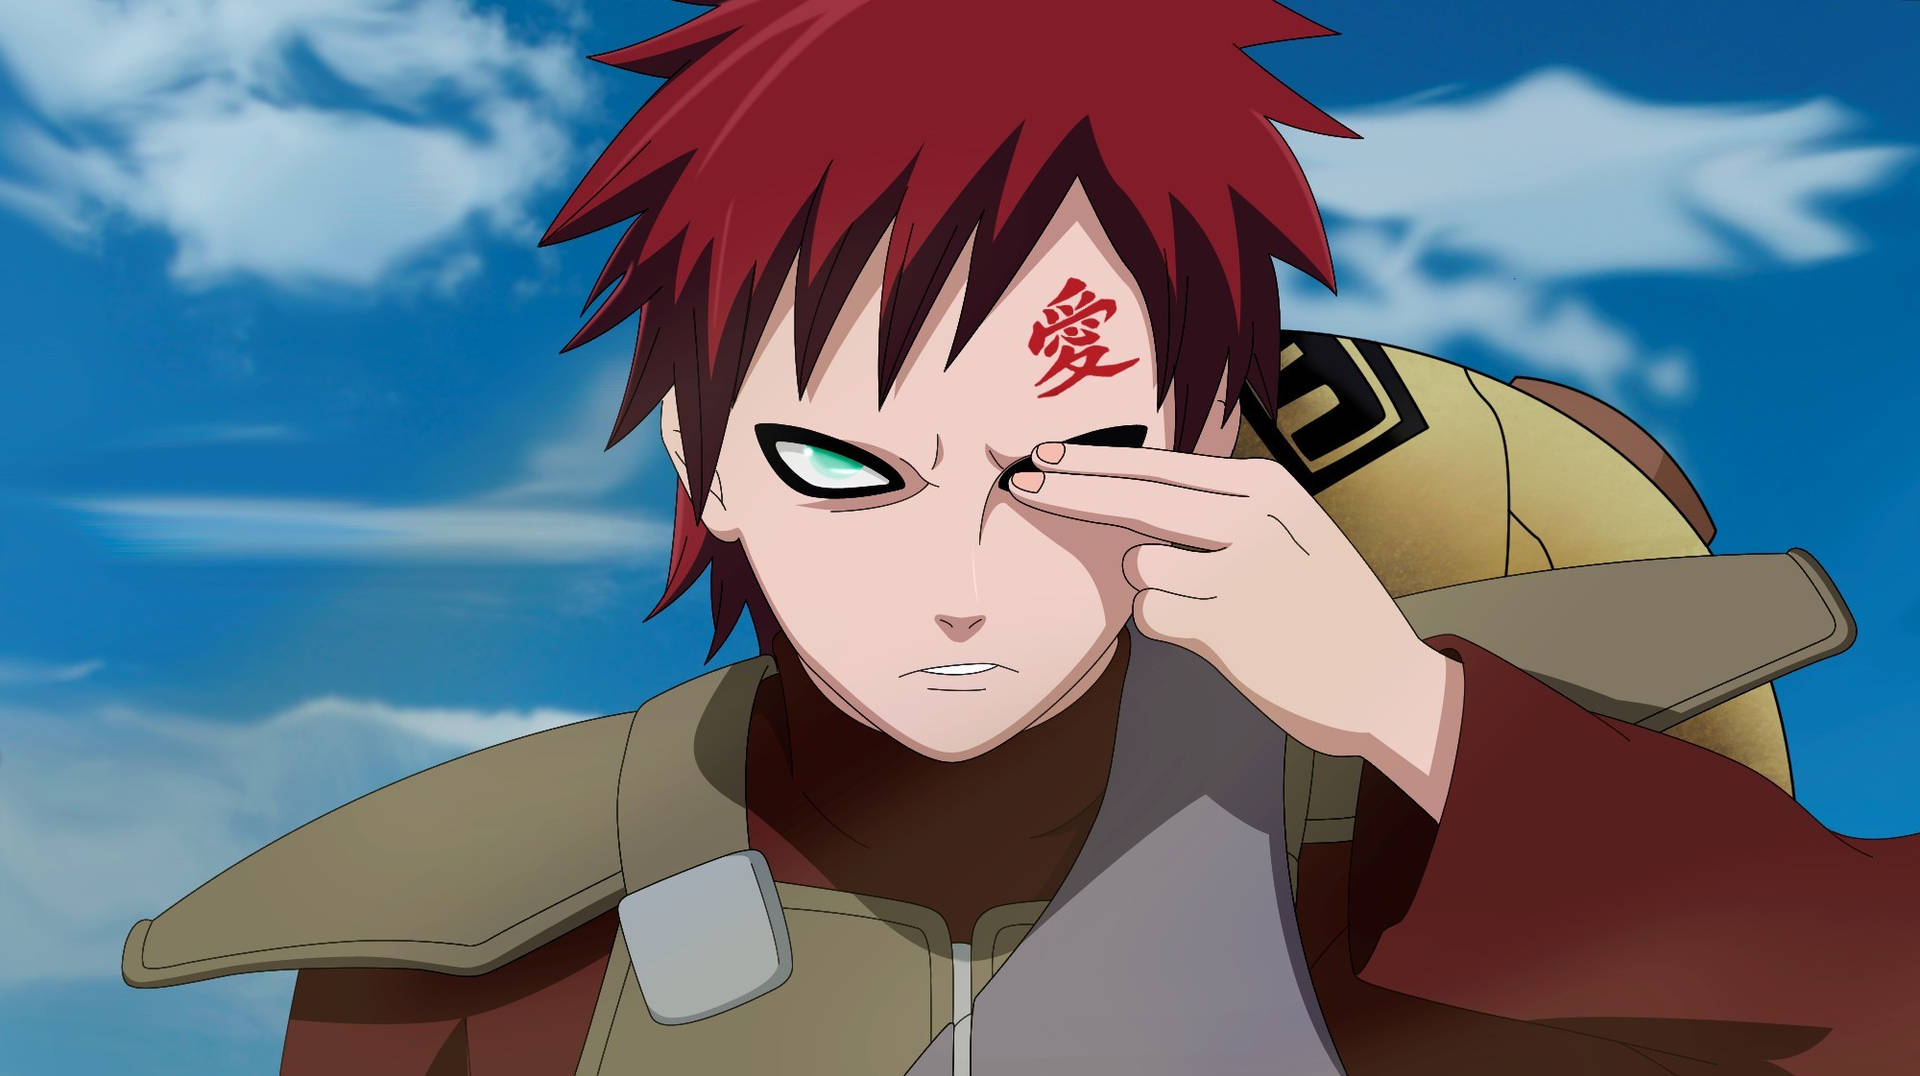 An Ipad Wallpaper Of Gaara From The Anime Series Naruto Focusing And Staring At Something, With Two Of His Fingers Covering His Right Eye. Wallpaper